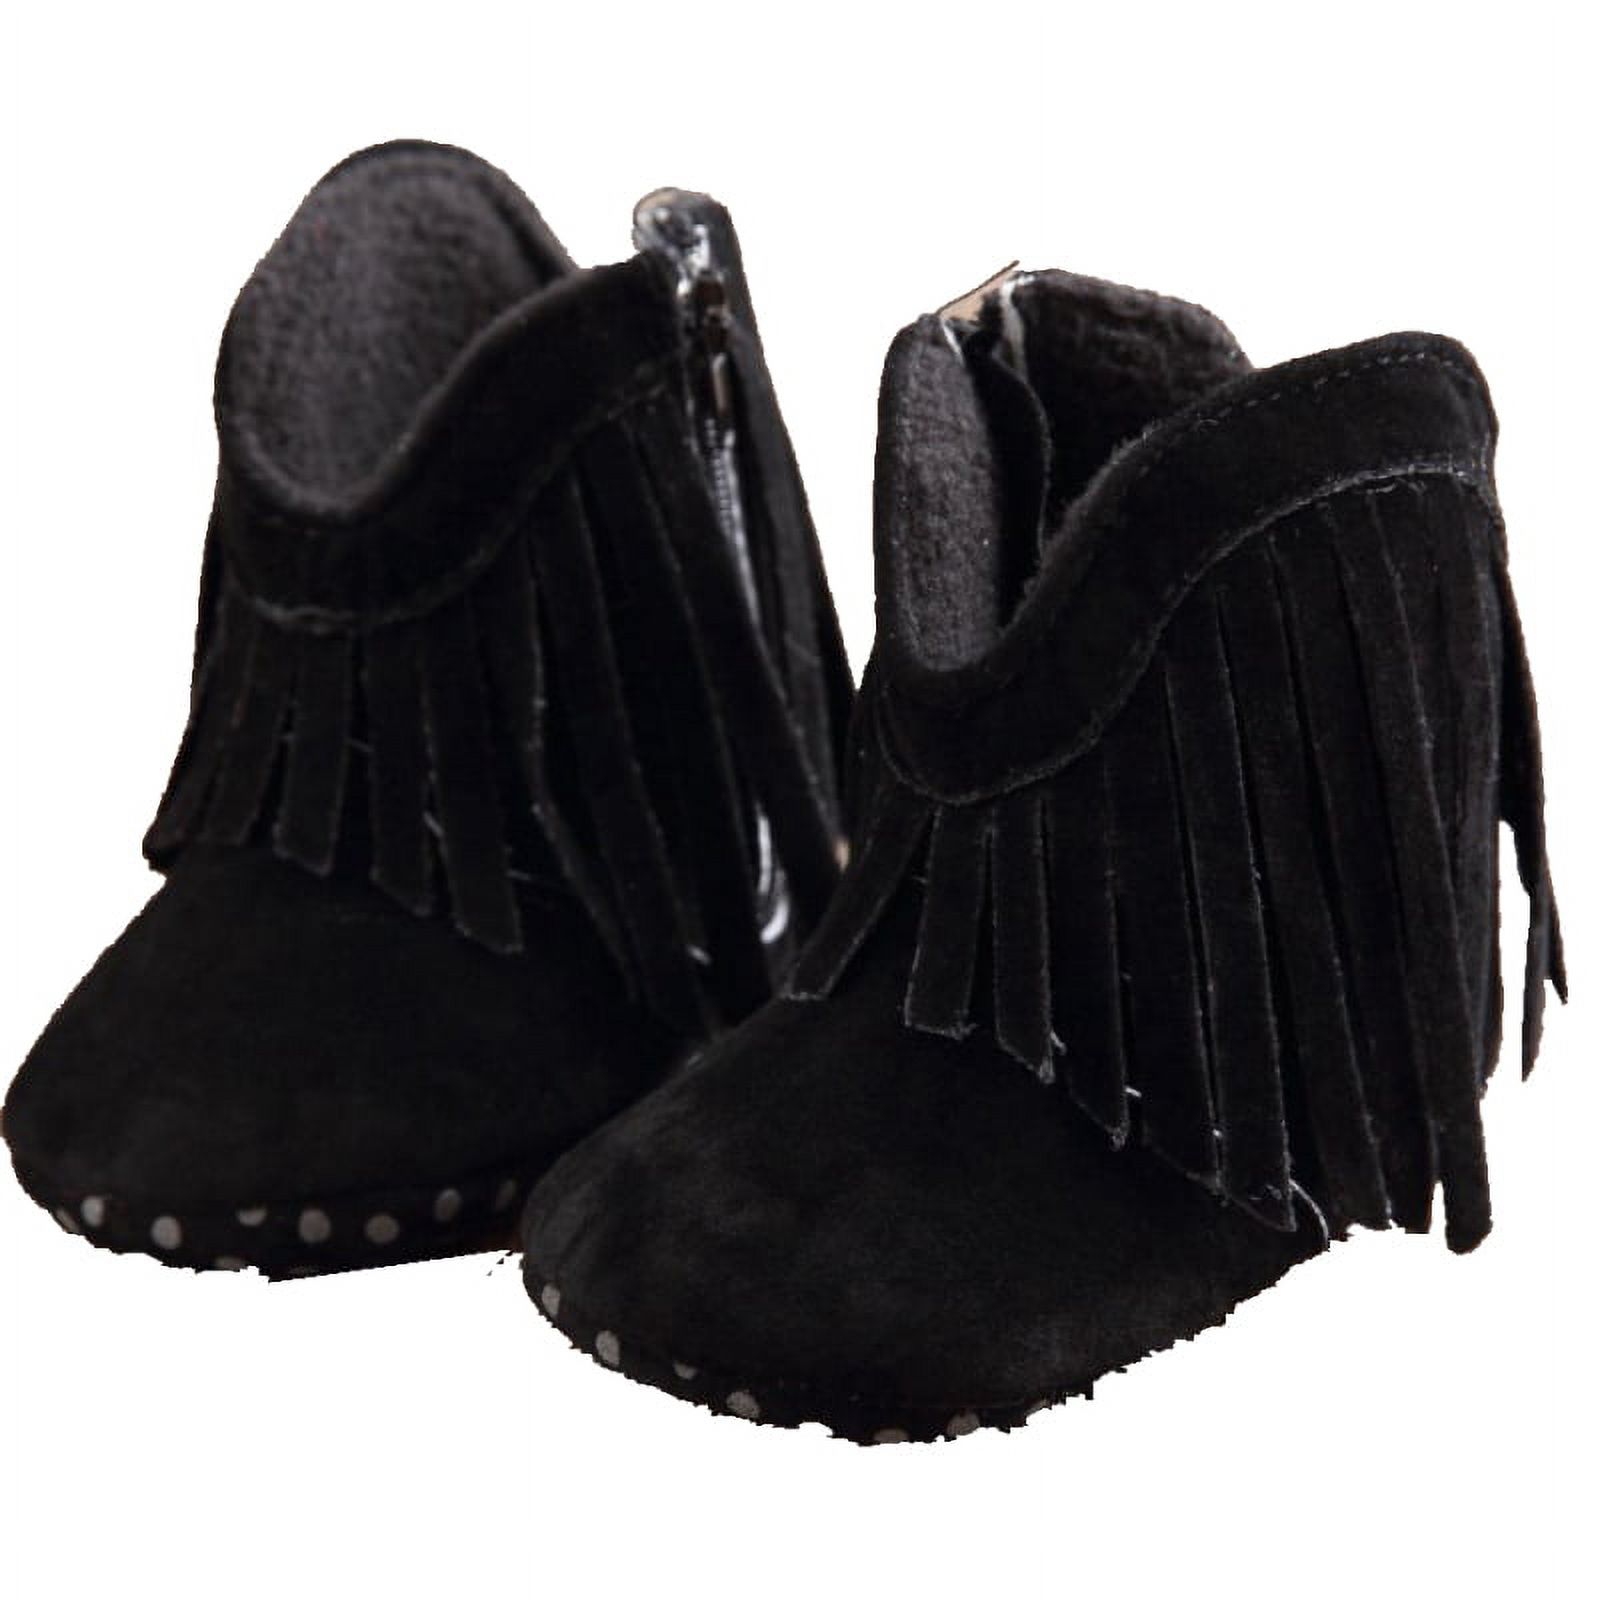 SHEMALL Newborn Toddler Tassel Boots Baby Boy Girl Soft Soled Winter Shoes - image 1 of 5